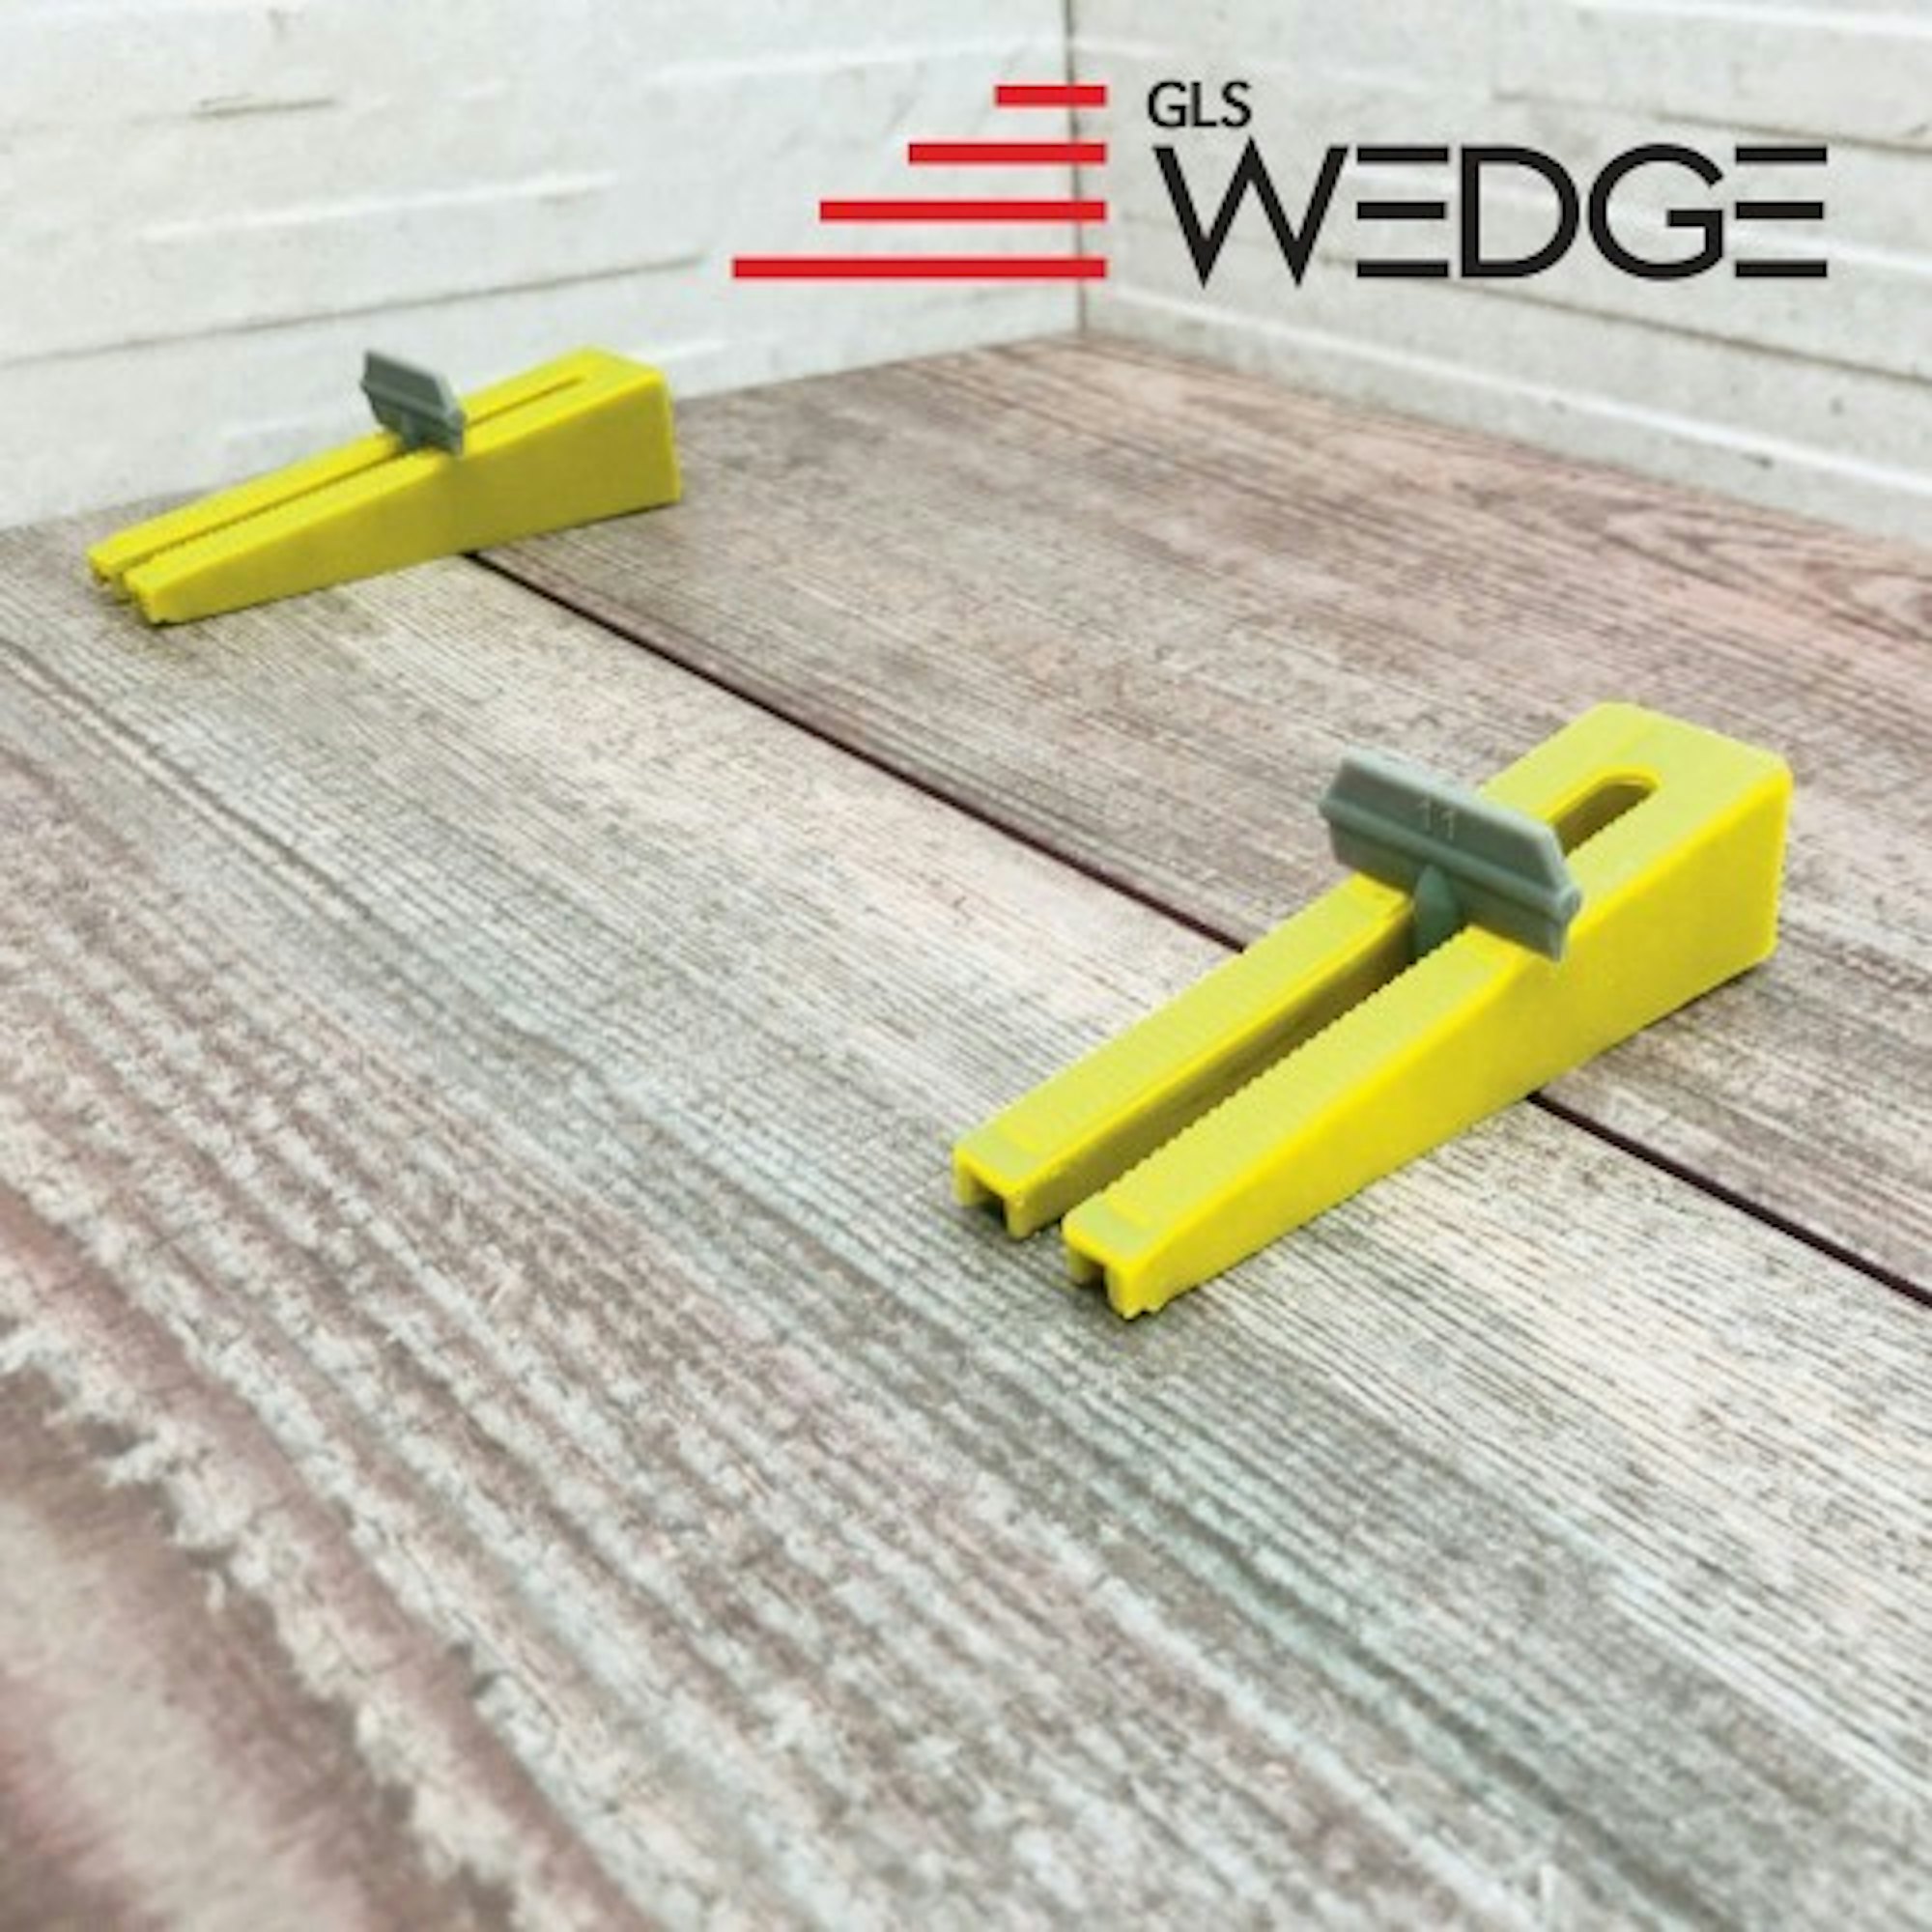 Genesis Easy Wedge Levelling System Application Tool